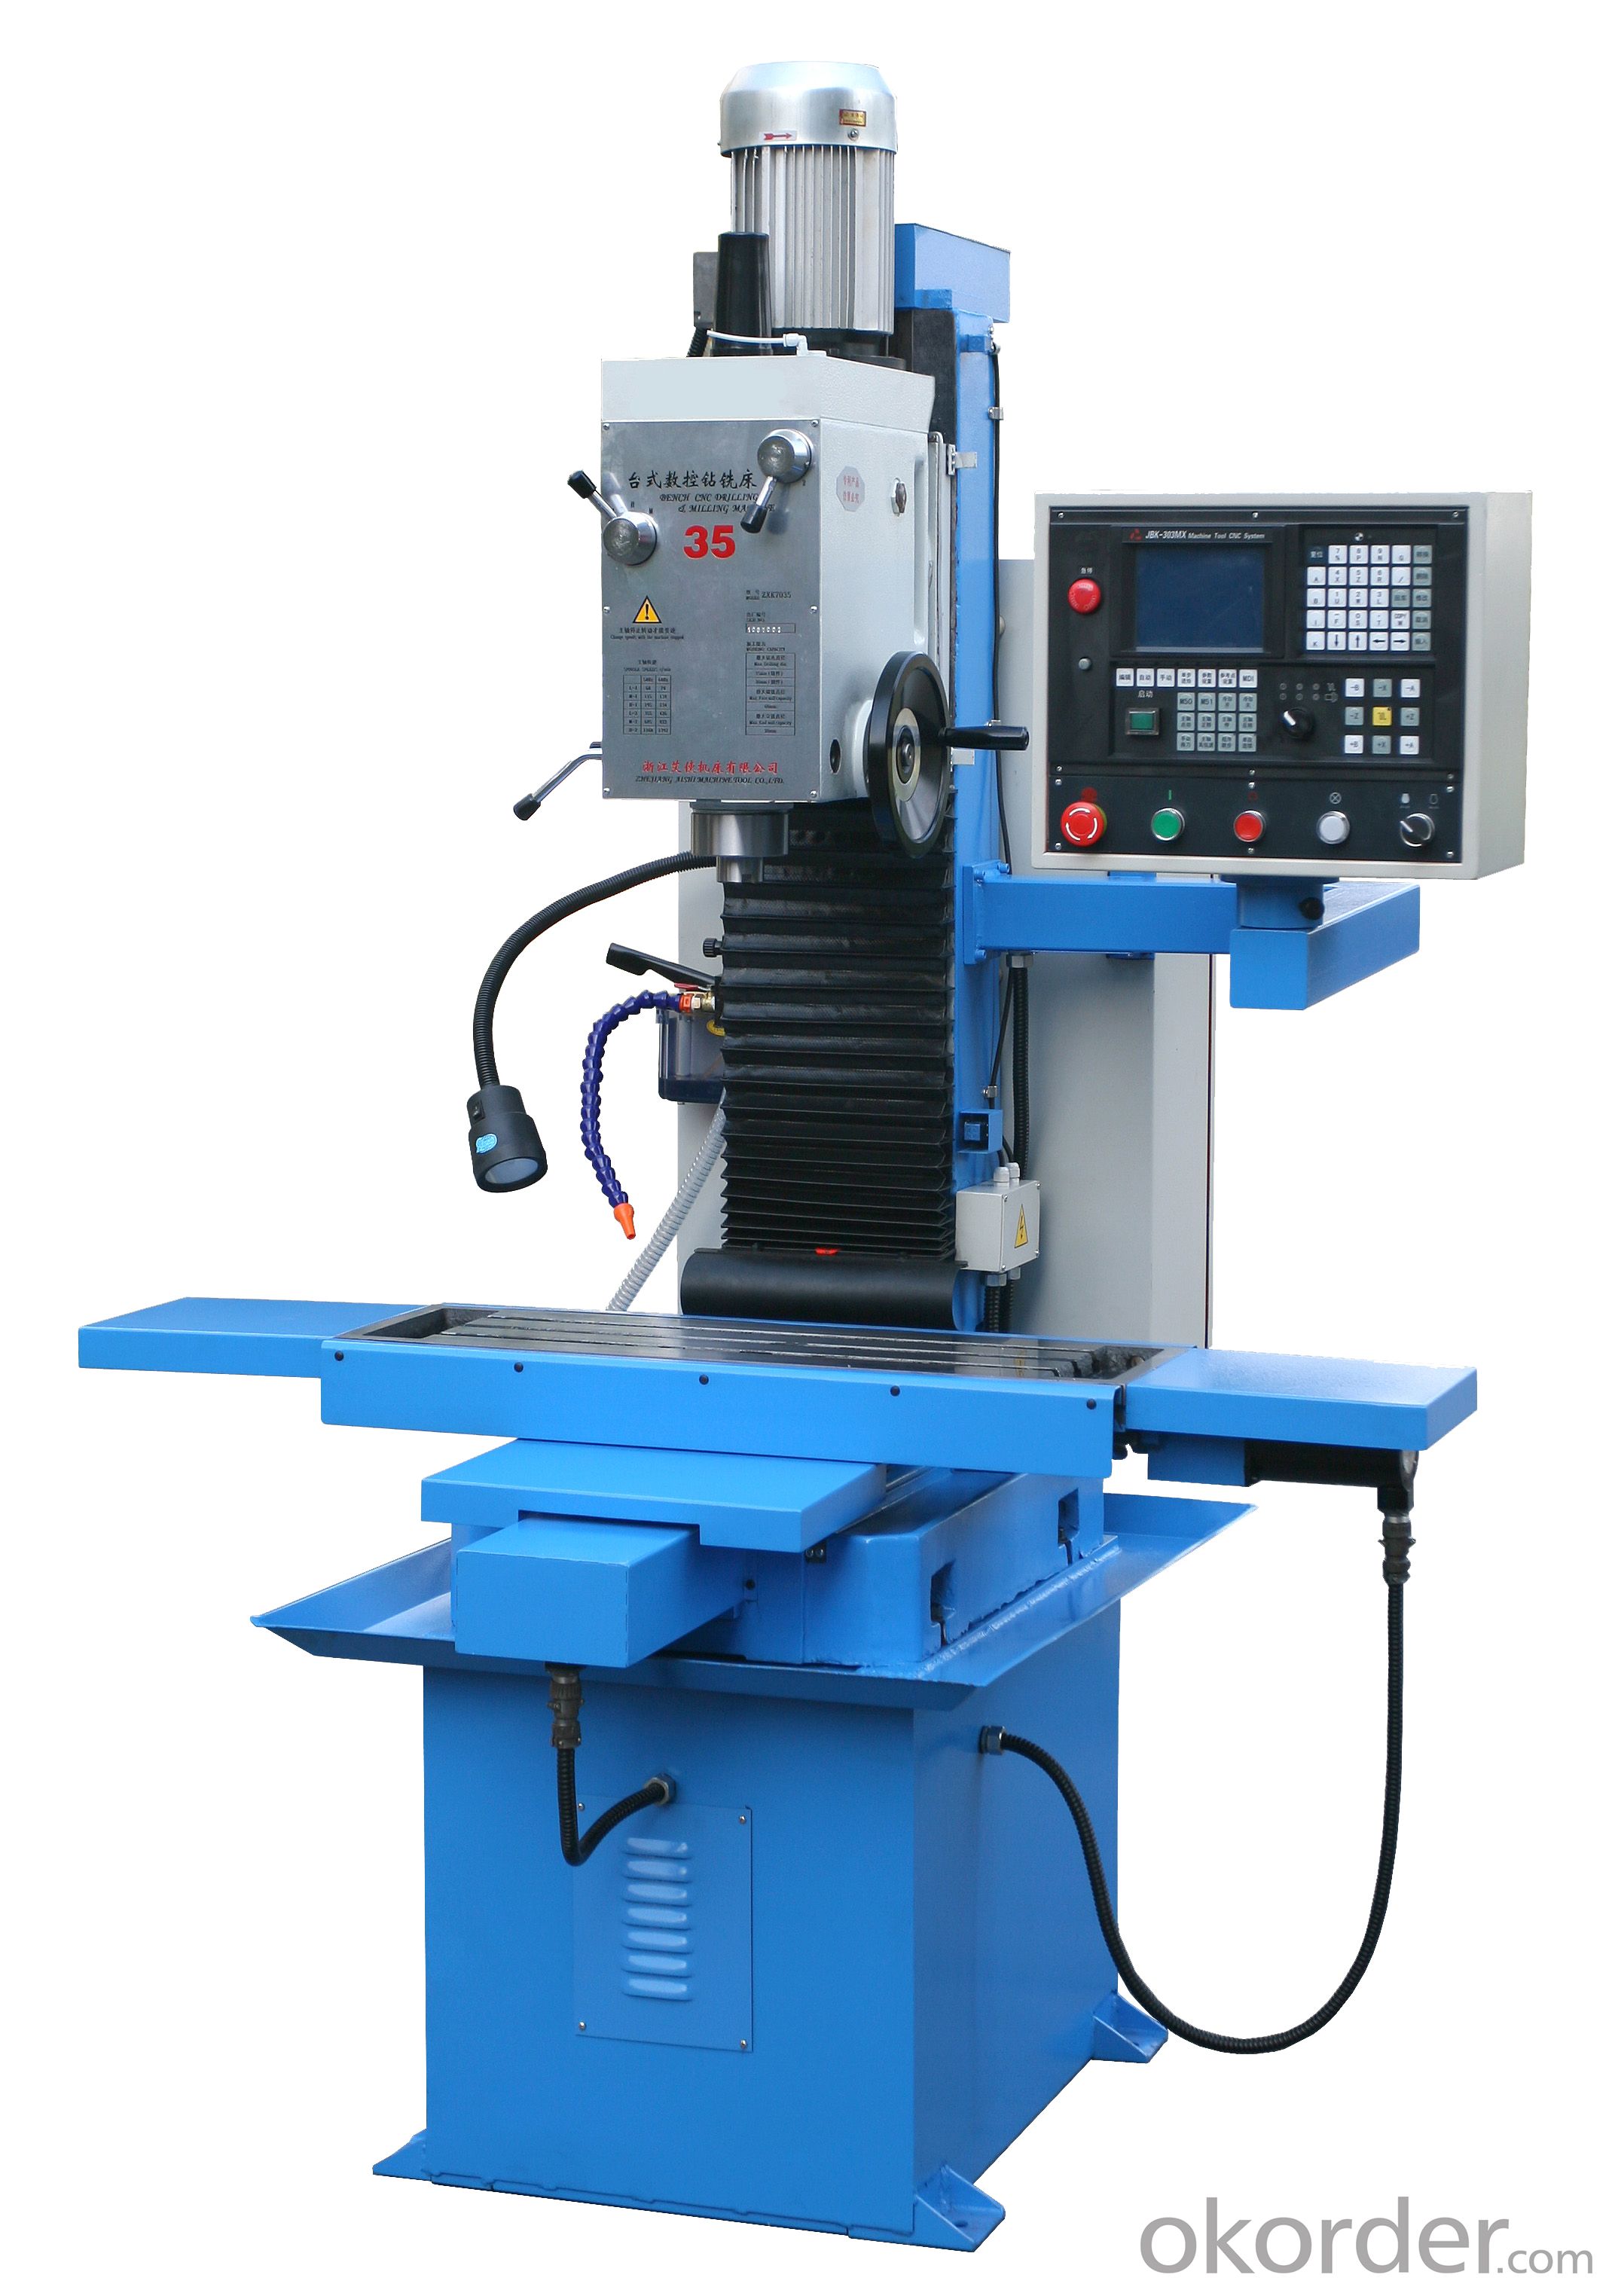 CNC drilling and milling machine realtime quotes, lastsale prices